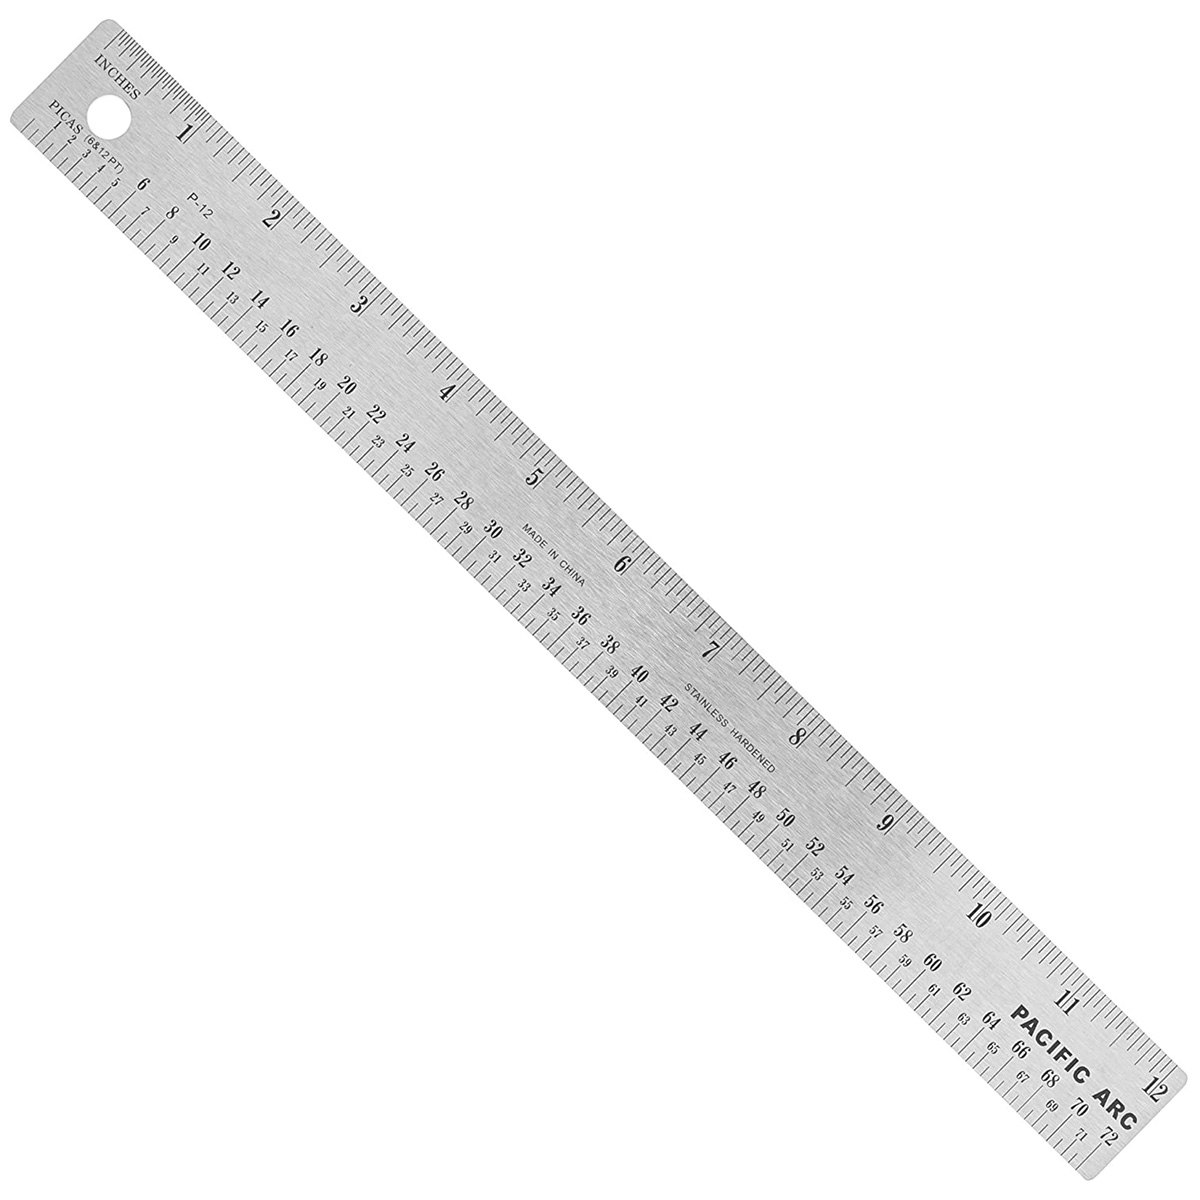 Inches and Agate Measurements Pacific Arc 24 inch Pica Pole Metal Ruler Stainless Steel Ruler for Drafting Points with Pica 